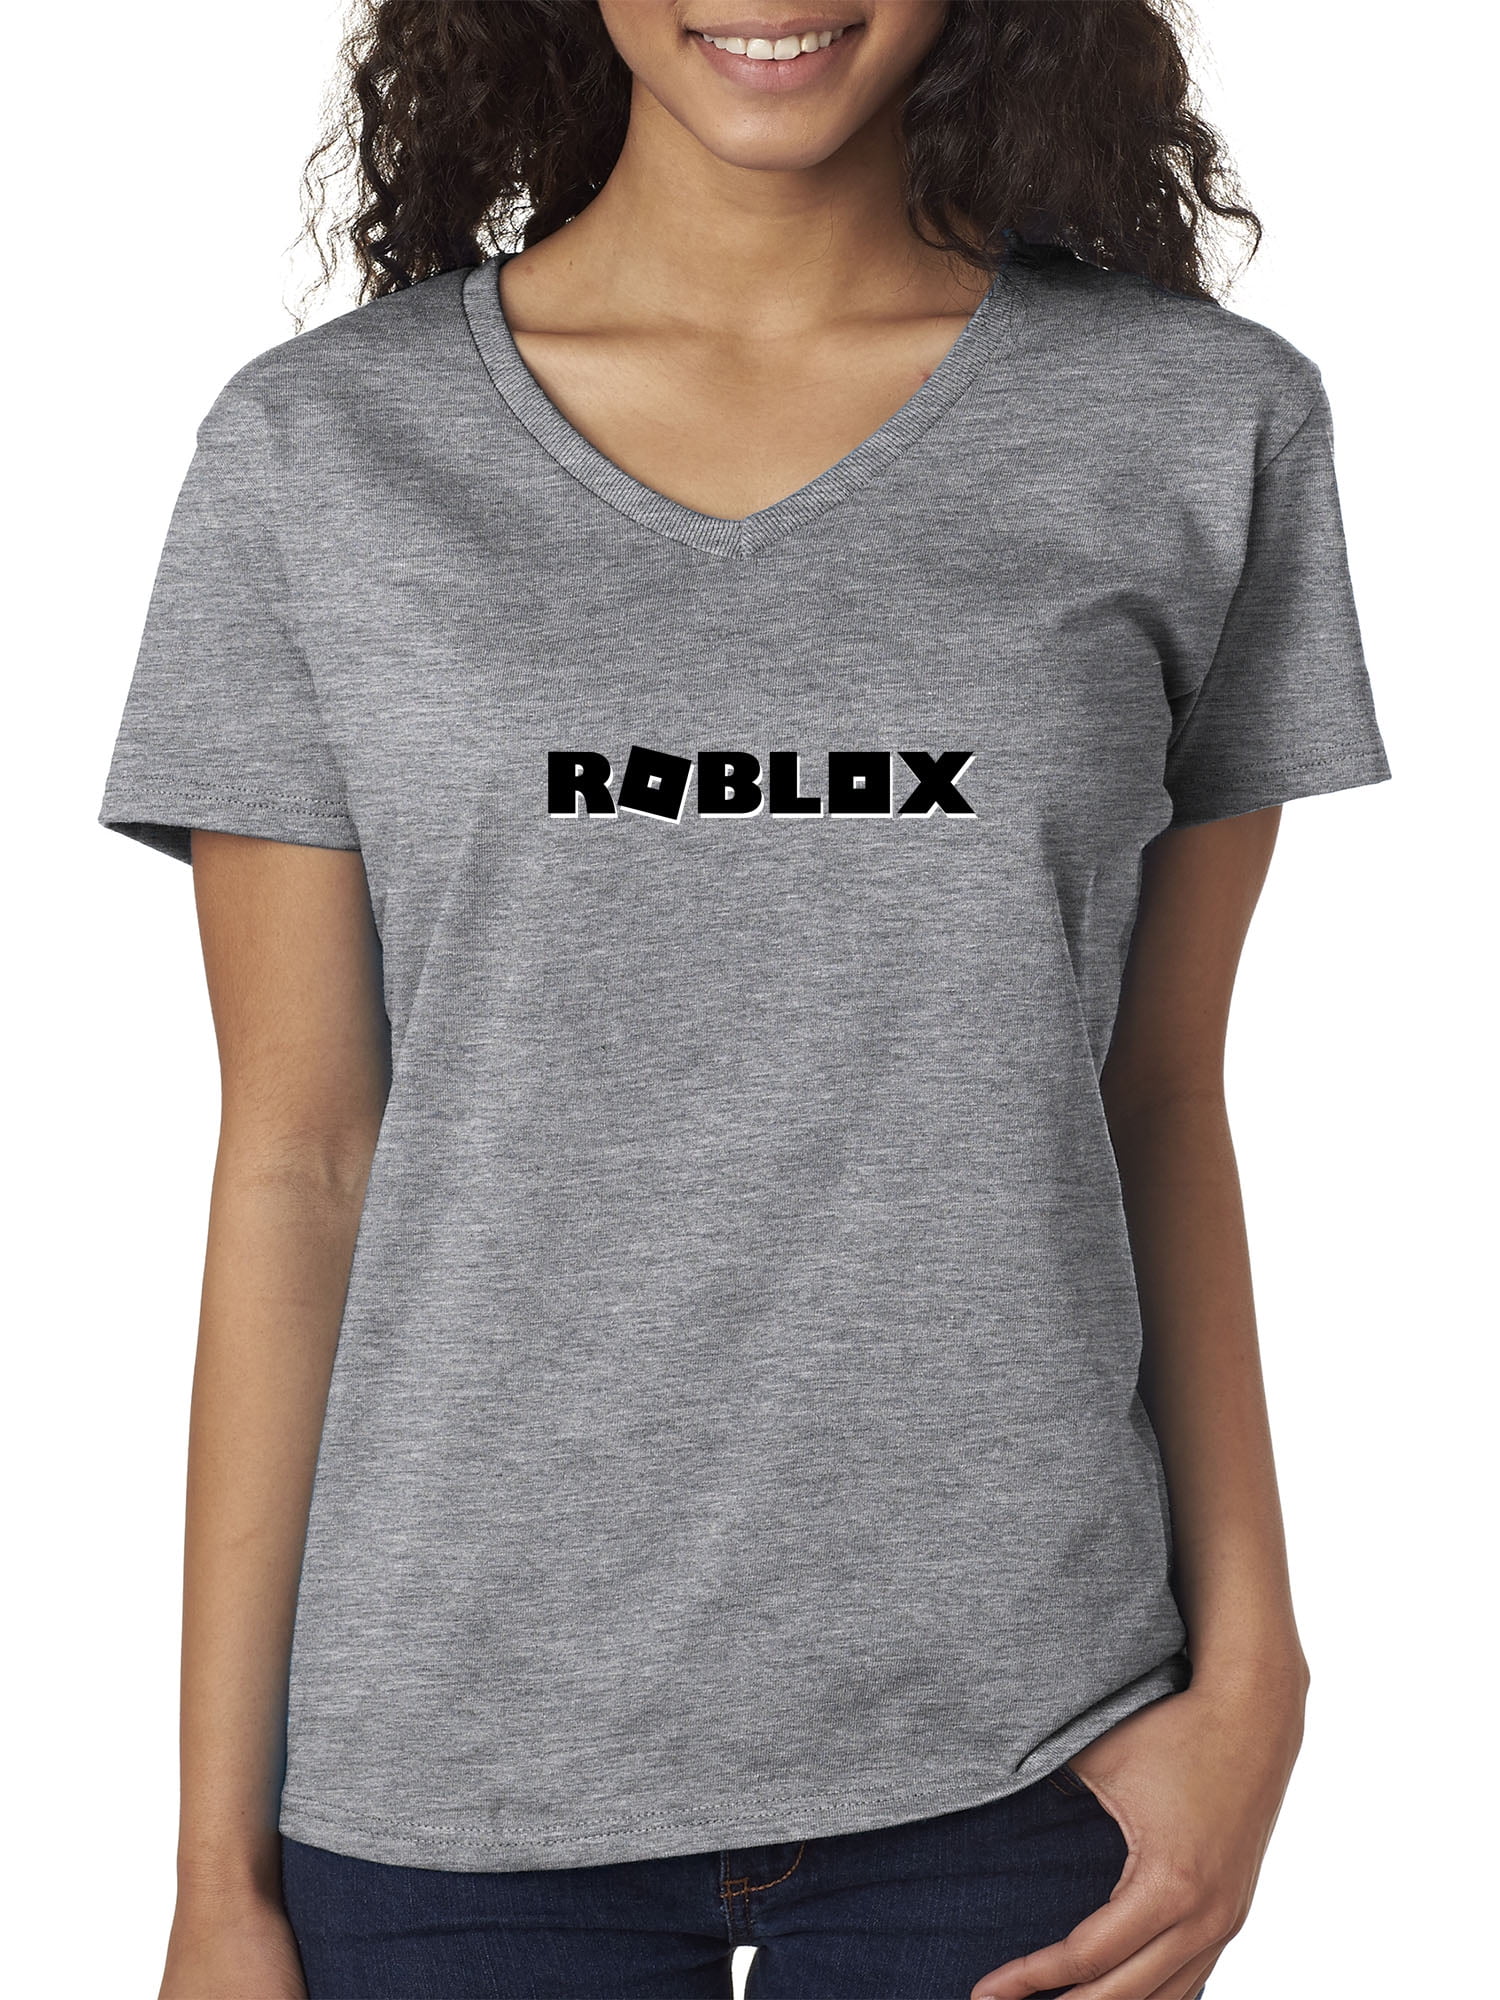 Trendy Usa Trendy Usa 1168 Women S V Neck T Shirt Roblox Block Logo Game Accent Small Heather Grey Walmart Com - come get your block watch is fake shirt roblox amino